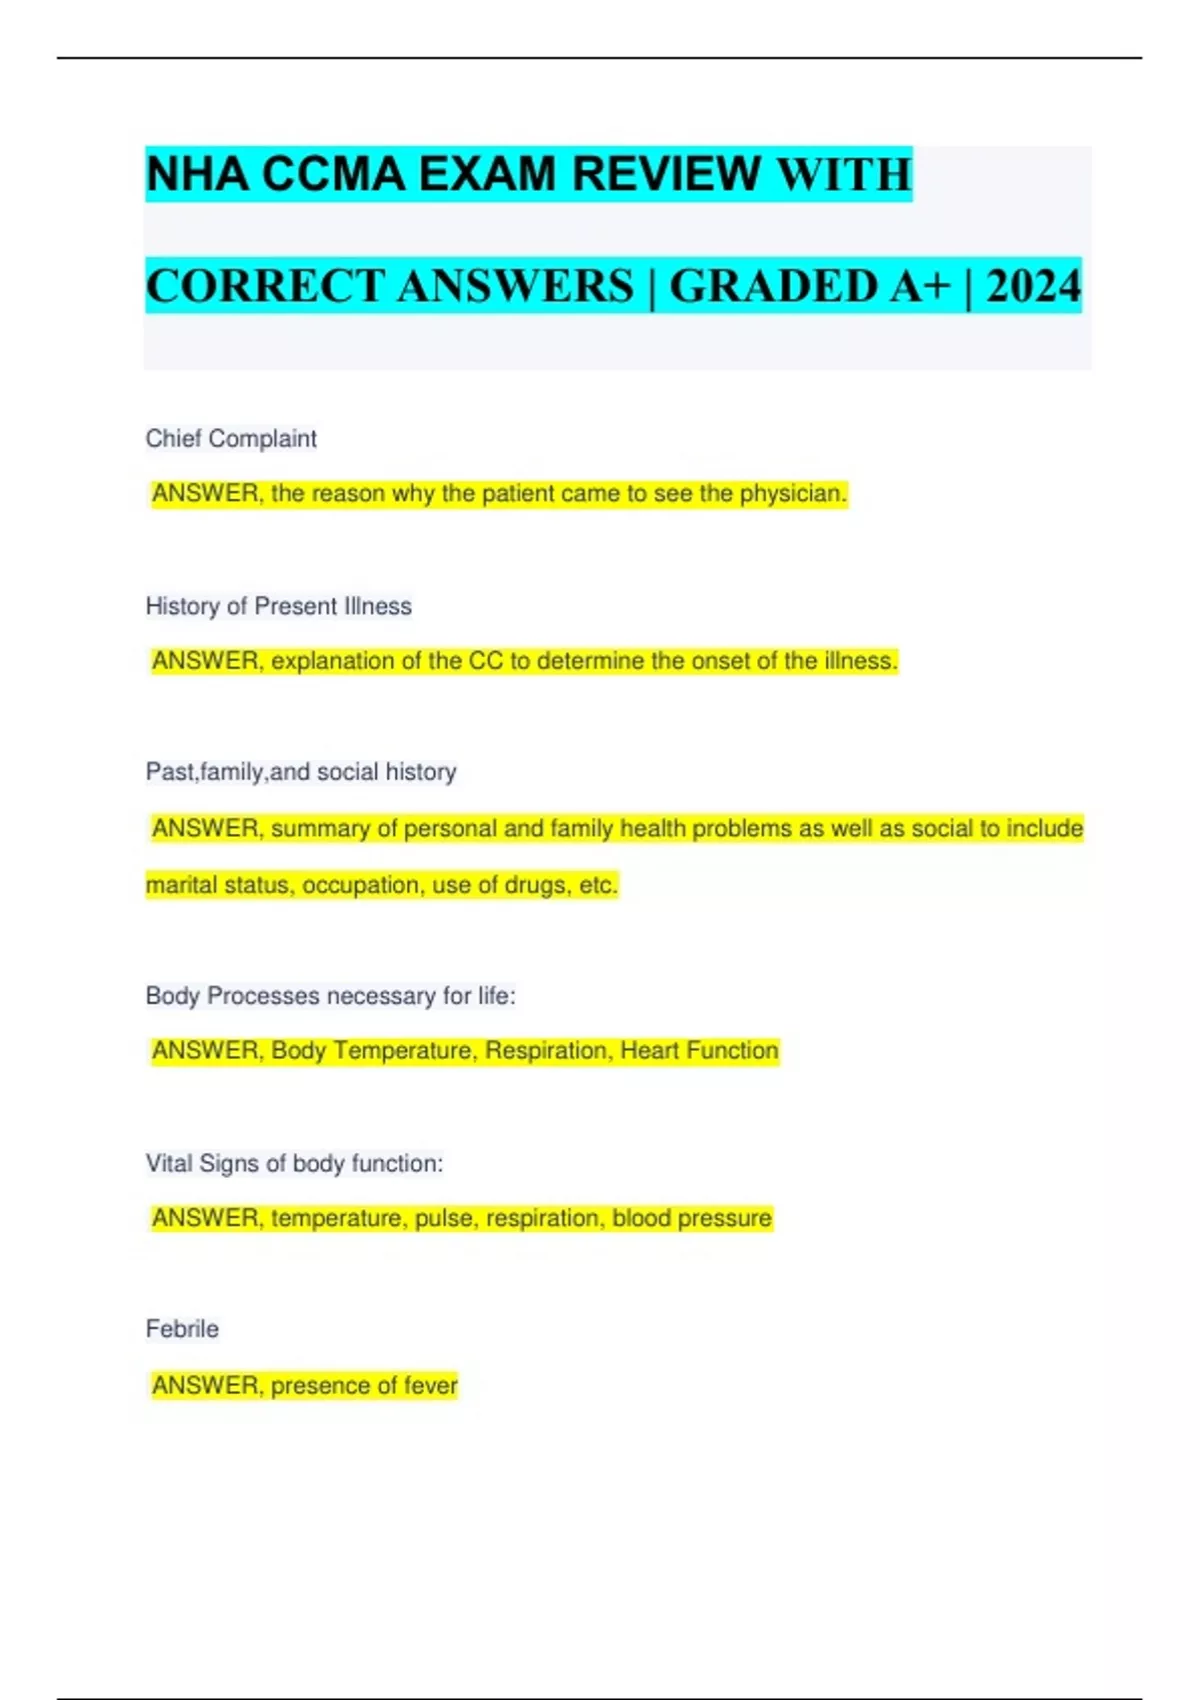 NHA CCMA EXAM REVIEW WITH CORRECT ANSWERS GRADED A+ 2024 NHA